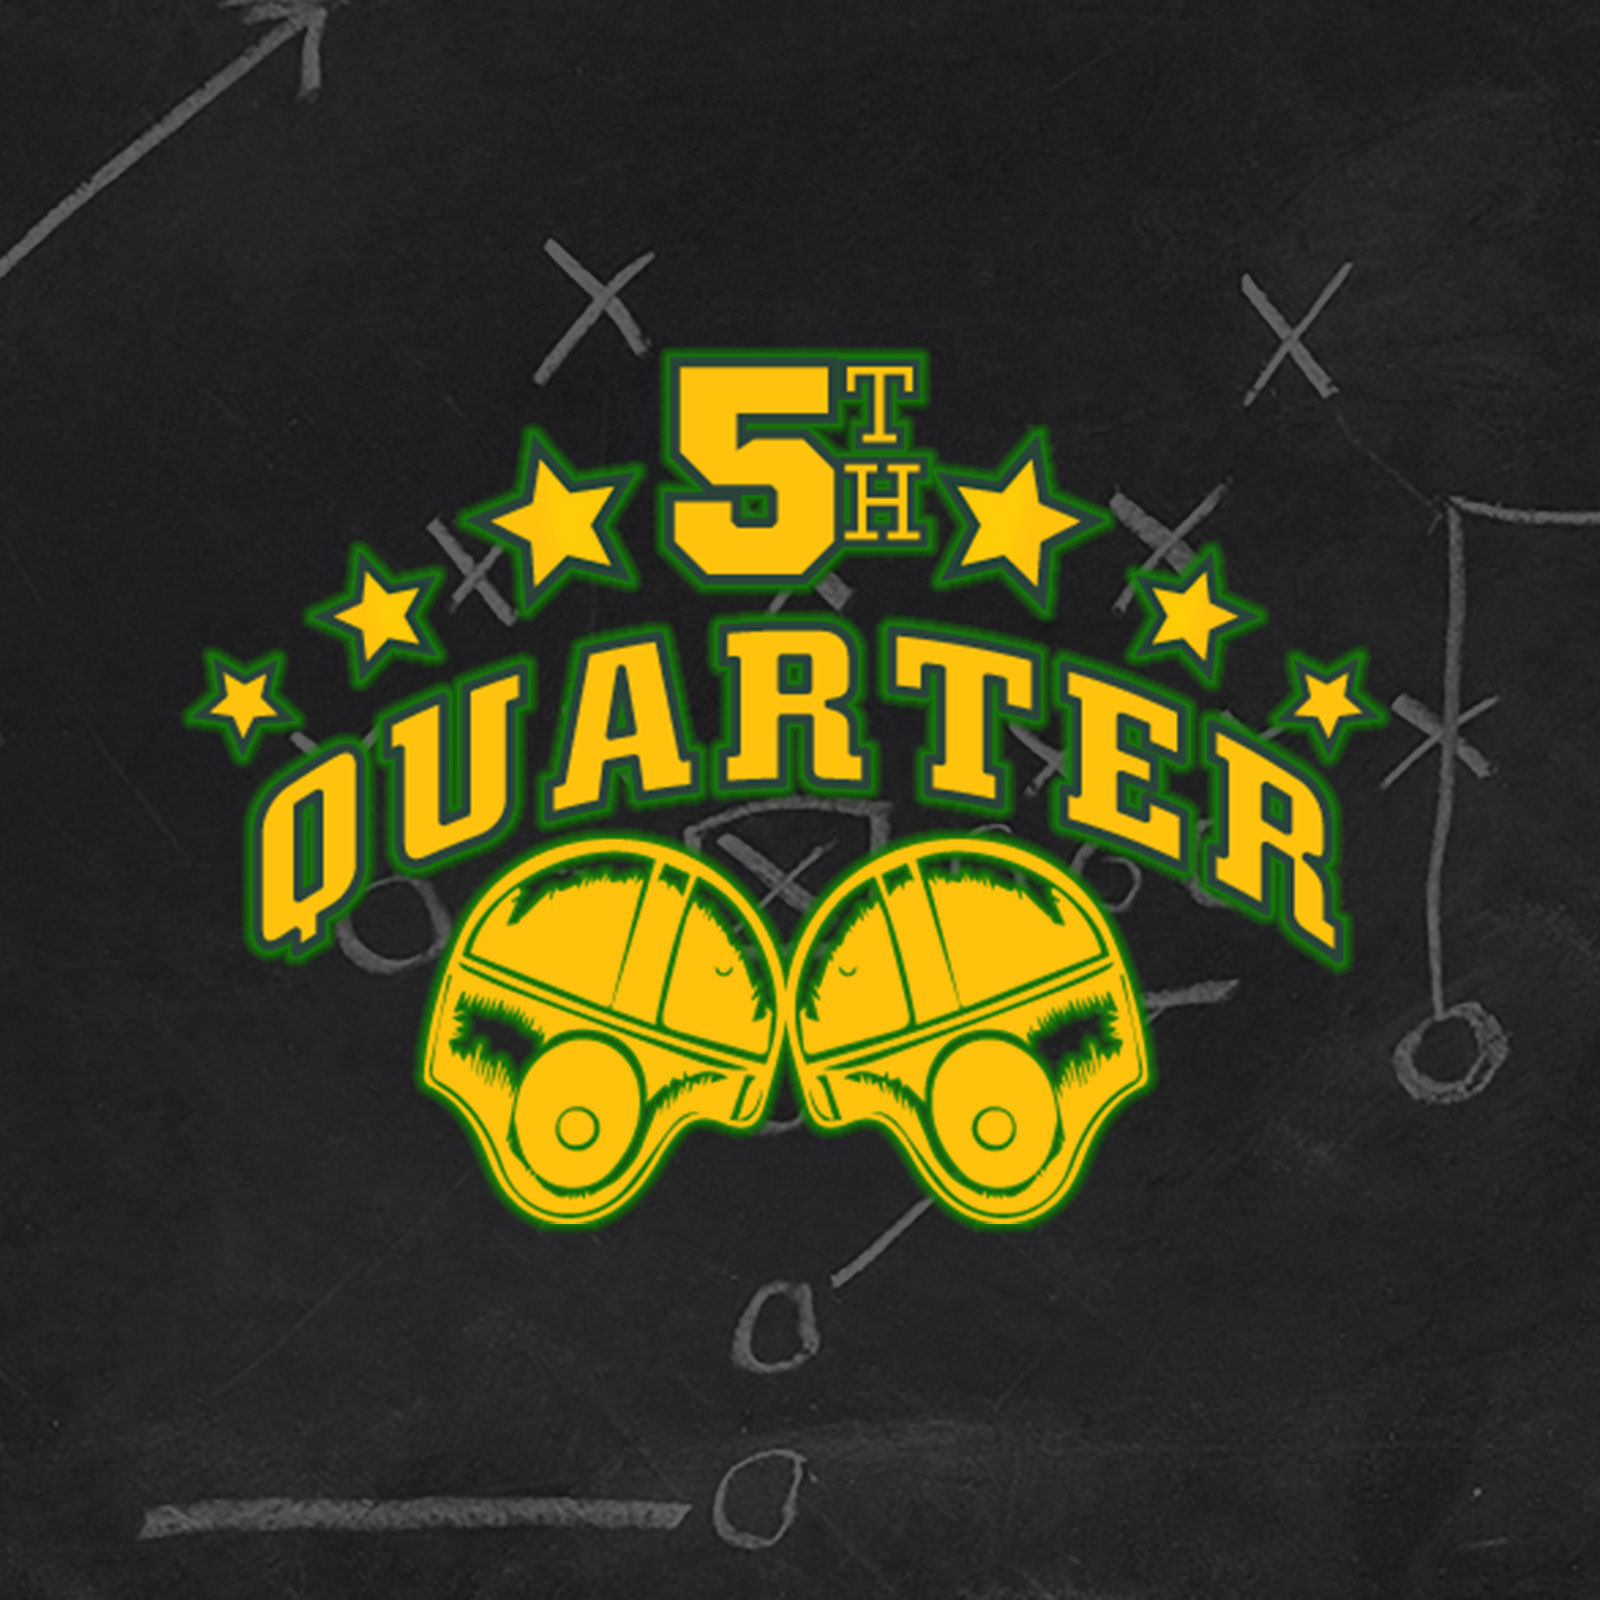 5th Quarter on Demand Audio - Full Show with Geronimo Allison on 11/13/17